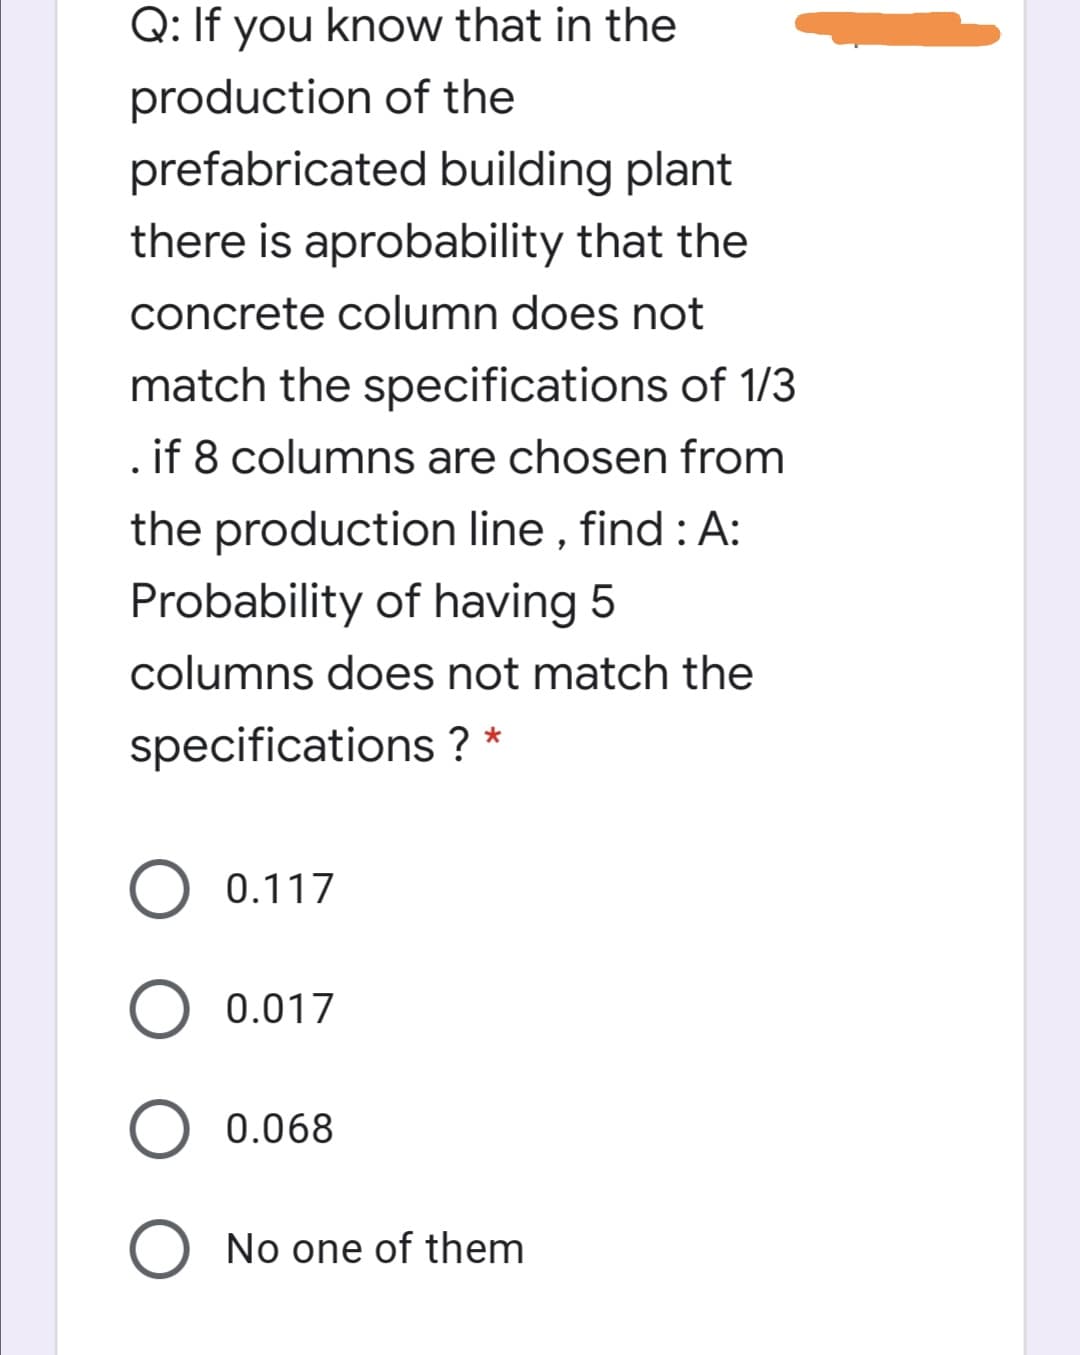 Q: If you know that in the
production of the
prefabricated building plant
there is aprobability that the
concrete column does not
match the specifications of 1/3
.if 8 columns are chosen from
the production line , find : A:
Probability of having 5
columns does not match the
specifications ? *
0.117
0.017
0.068
No one of them
